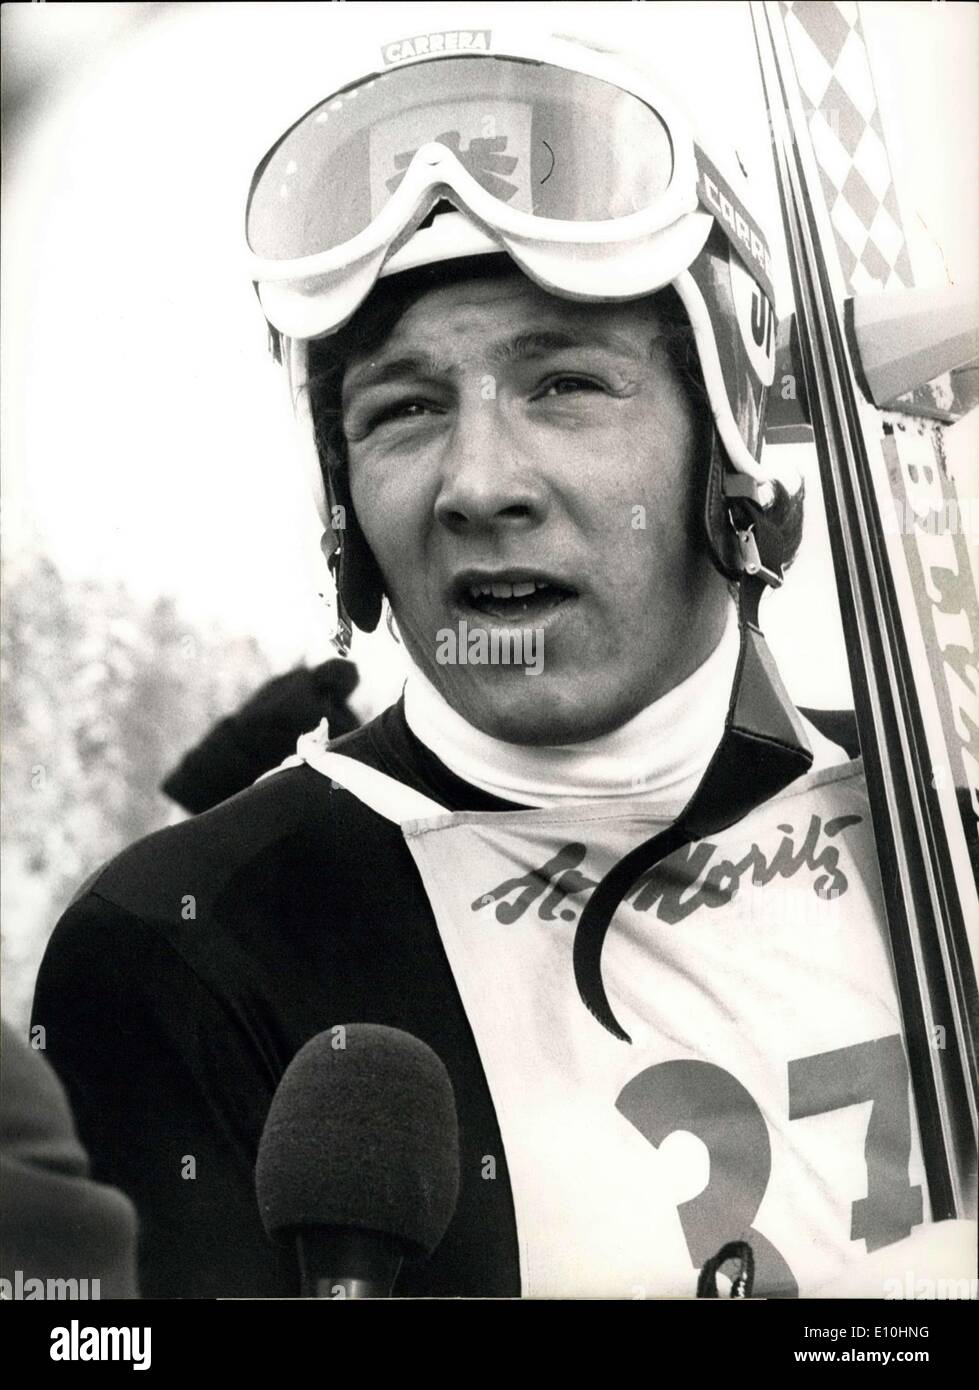 Feb. 12, 1973 - General Rehearsal In St. Moritz: Photo shows Unexpected winner of the downhill race in St. Moritz, last downhill competition counting for the World Cup, is Austrian Werner Grismann, here interviewed after his triumph. World-champion and Olympic champion Bernhard Russi, best time in the non-stop training, only on place 27! Stock Photo